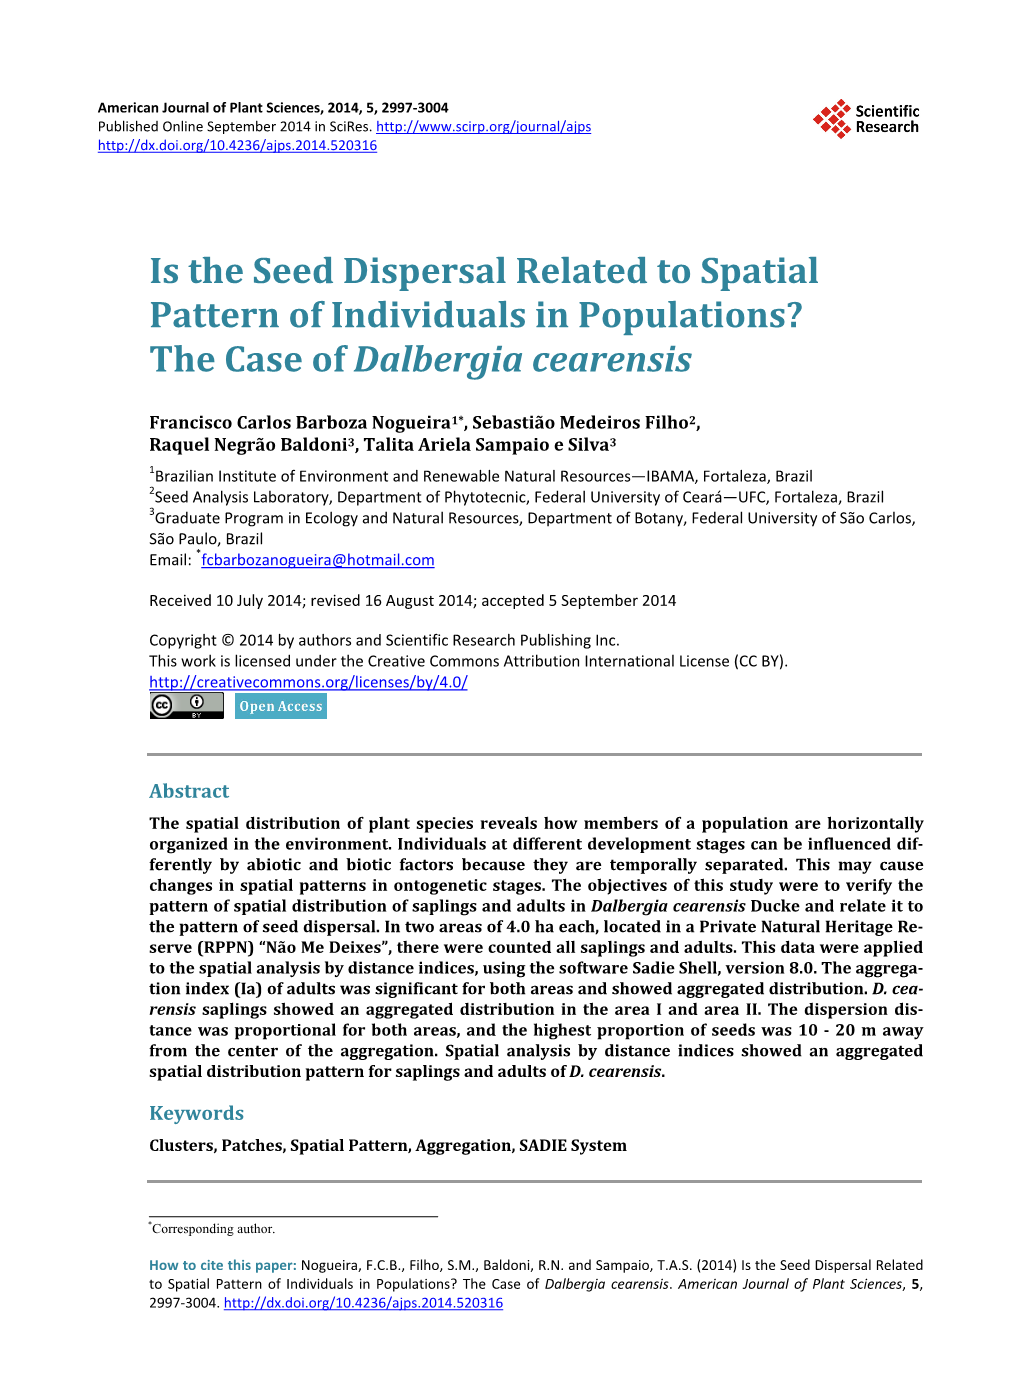 Is the Seed Dispersal Related to Spatial Pattern of Individuals in Populations? the Case of Dalbergia Cearensis